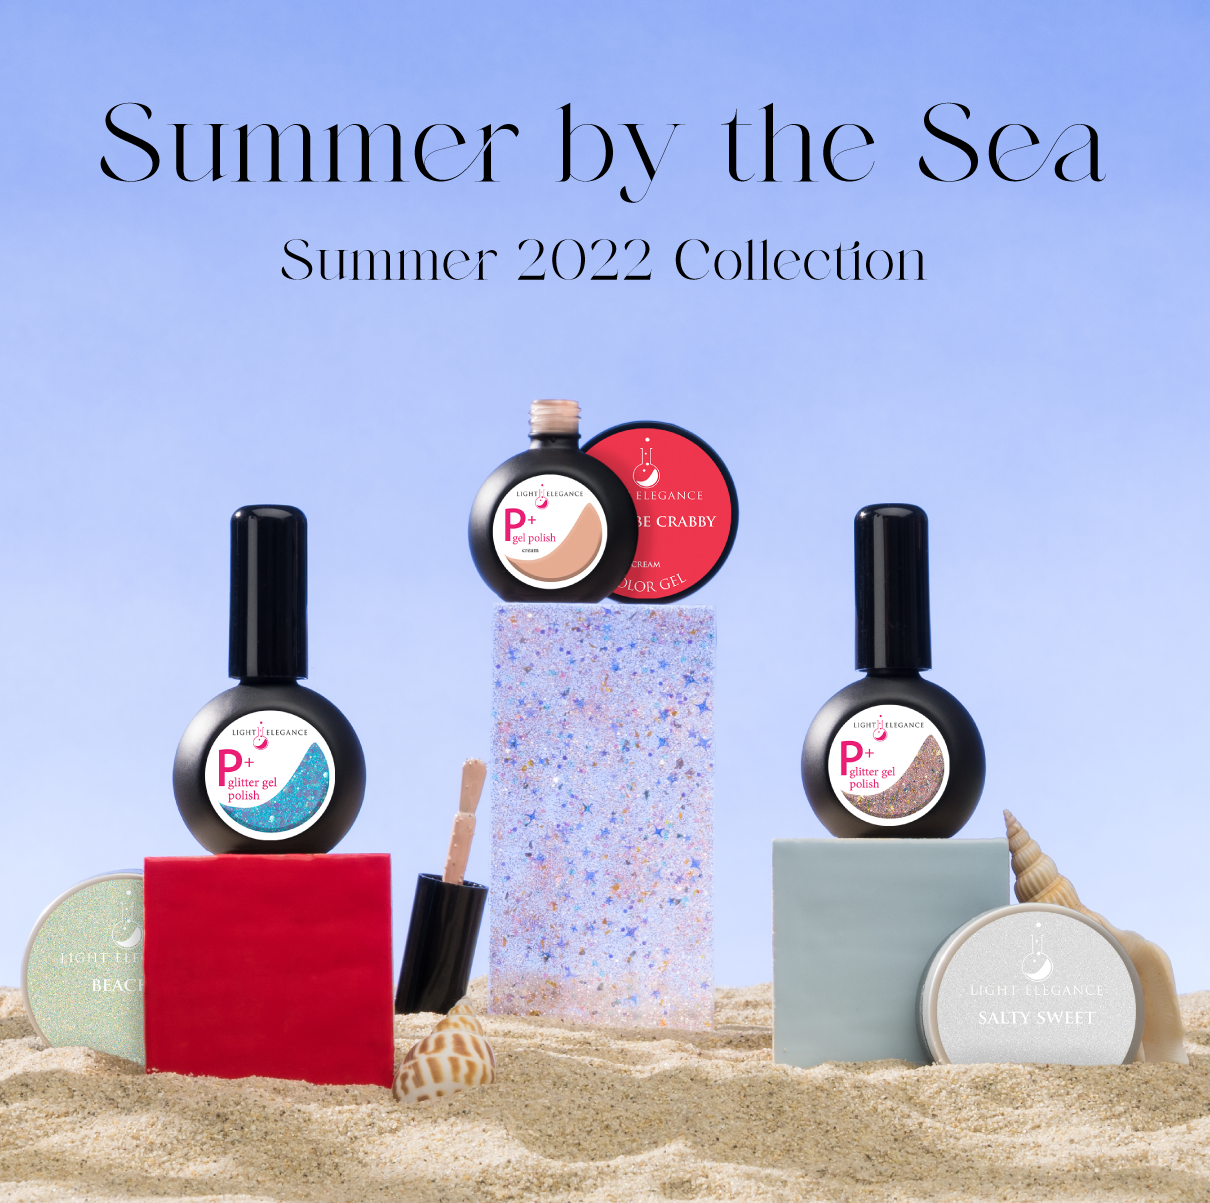 Light Elegance Summer 2022 Collection - Summer by the Sea